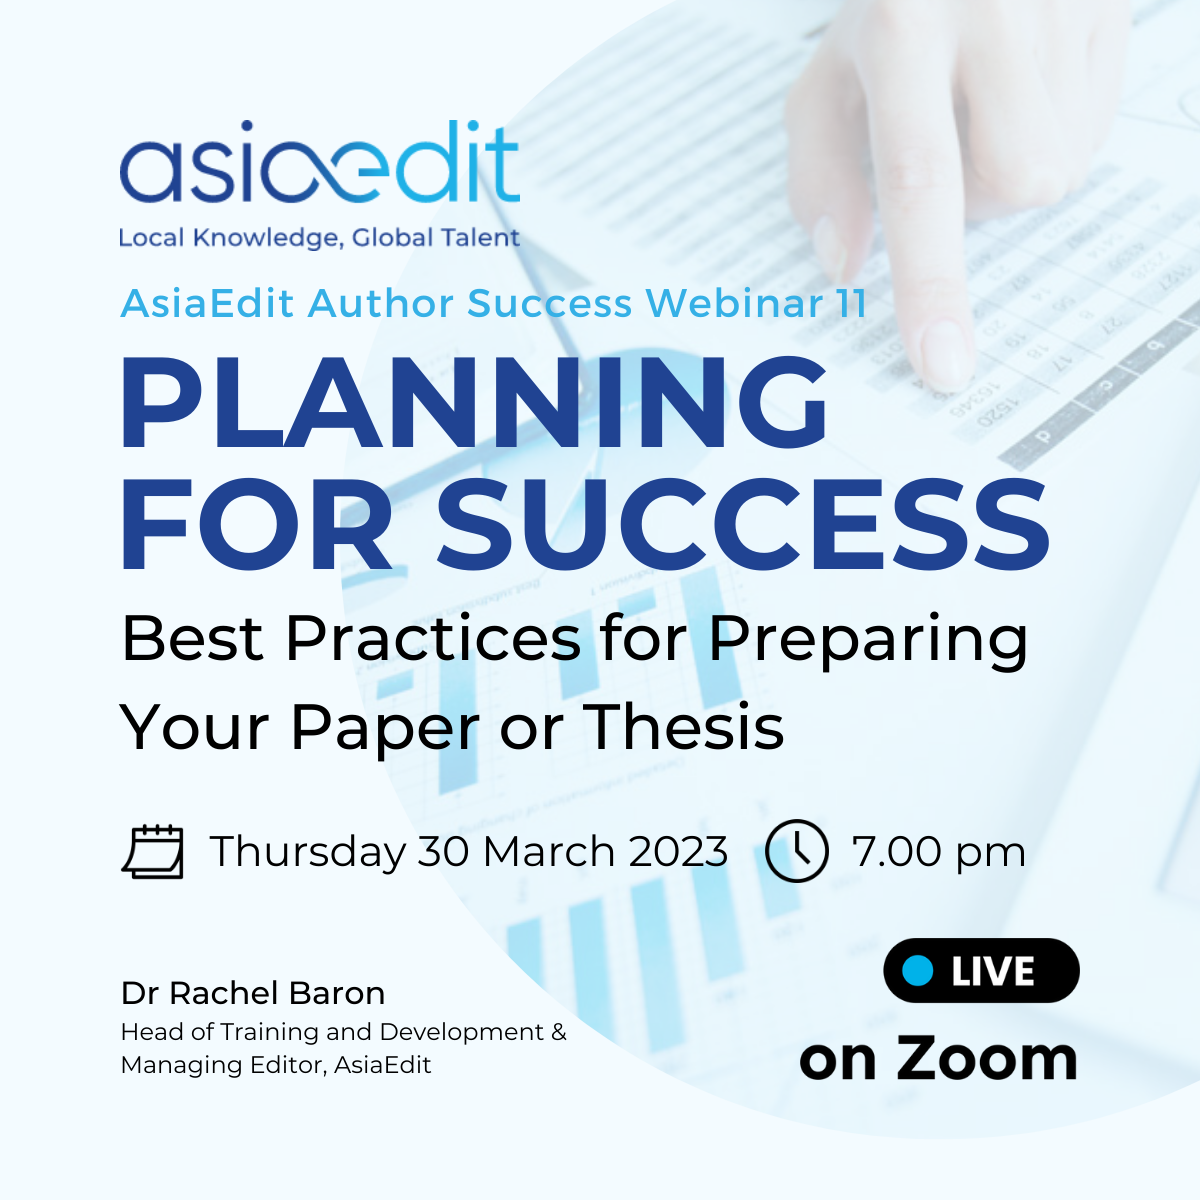 AsiaEdit Webinar - Planning for Success: Best Practices for Preparing Your Paper or Thesis